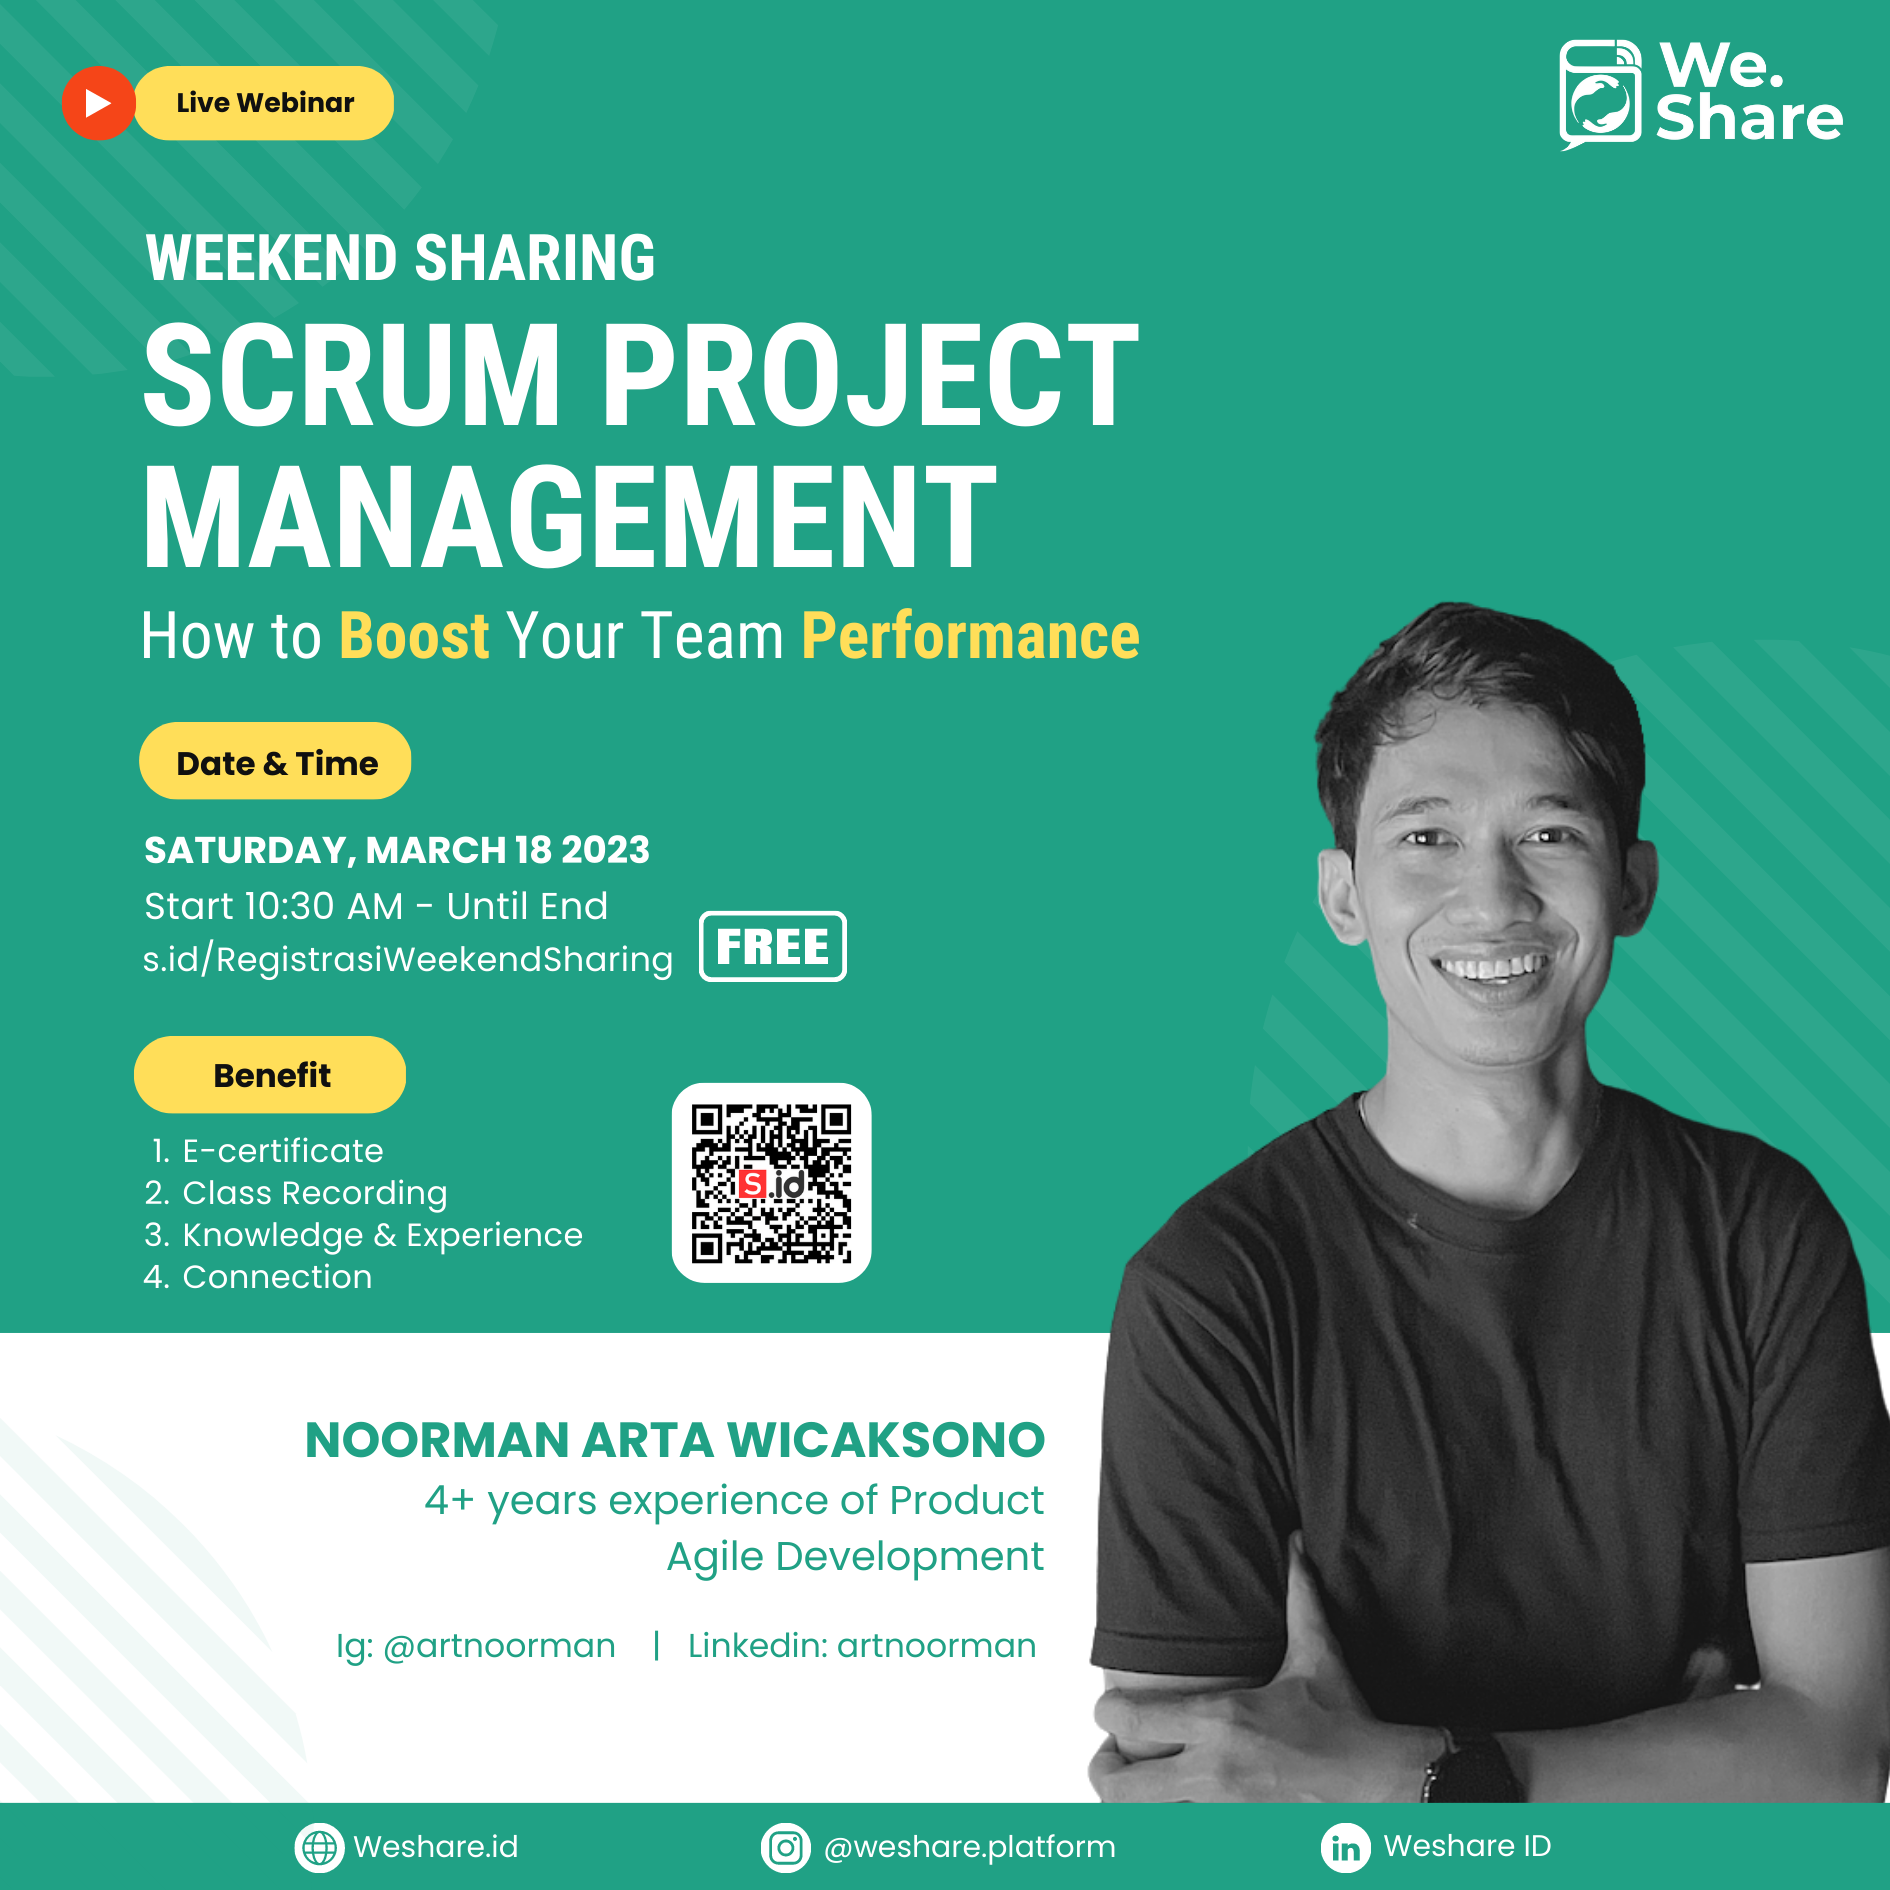 Weekend Sharing: Scrum Project Management How to Boost Your Team Performance